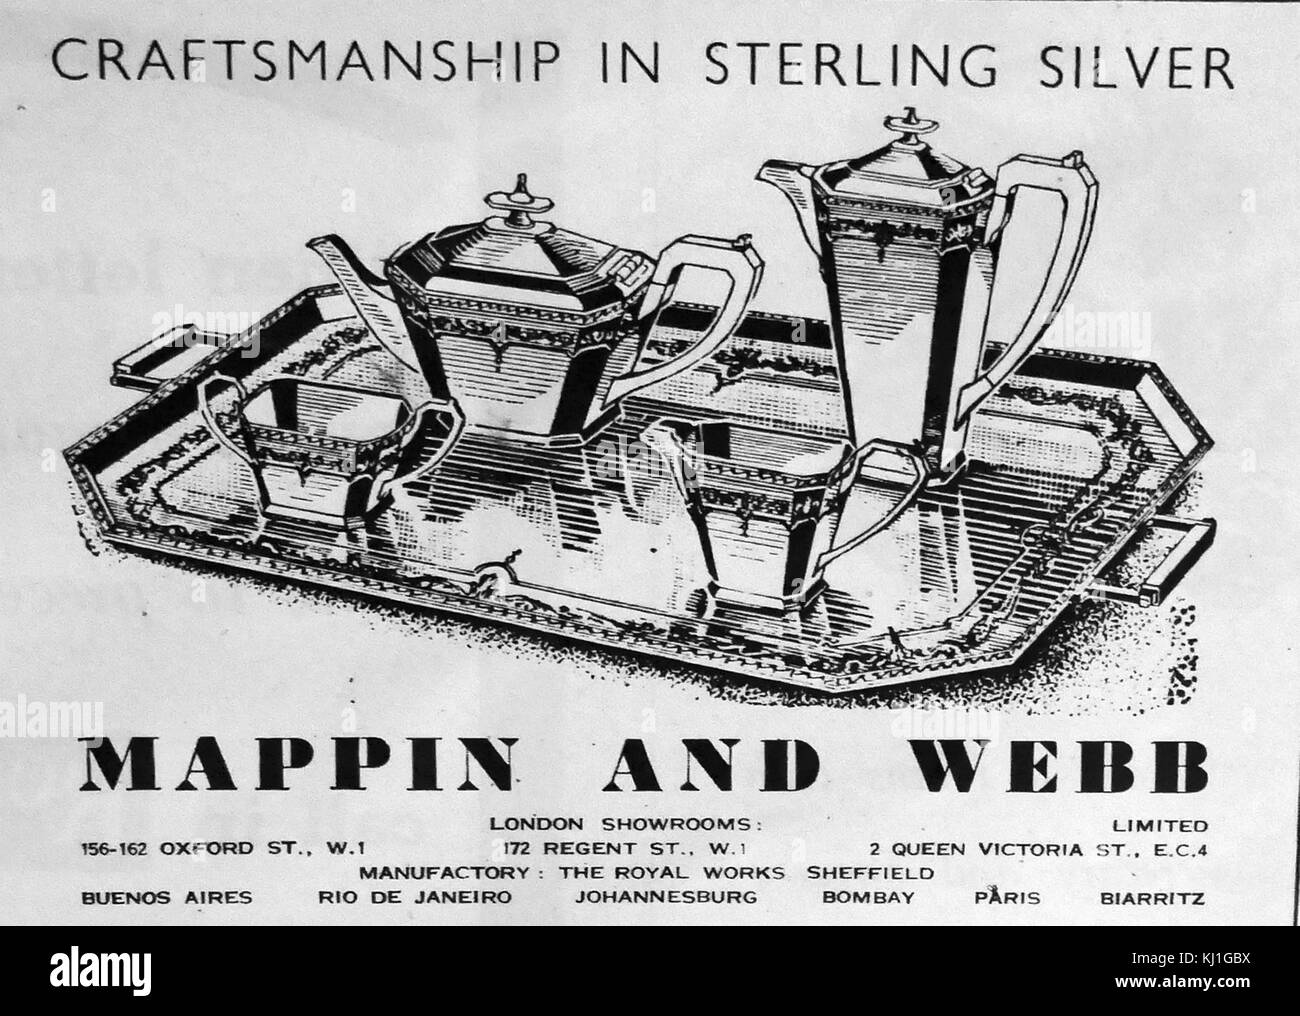 1947 advertisement for a Mapin and Webb, Sterling silver tea service. Stock Photo